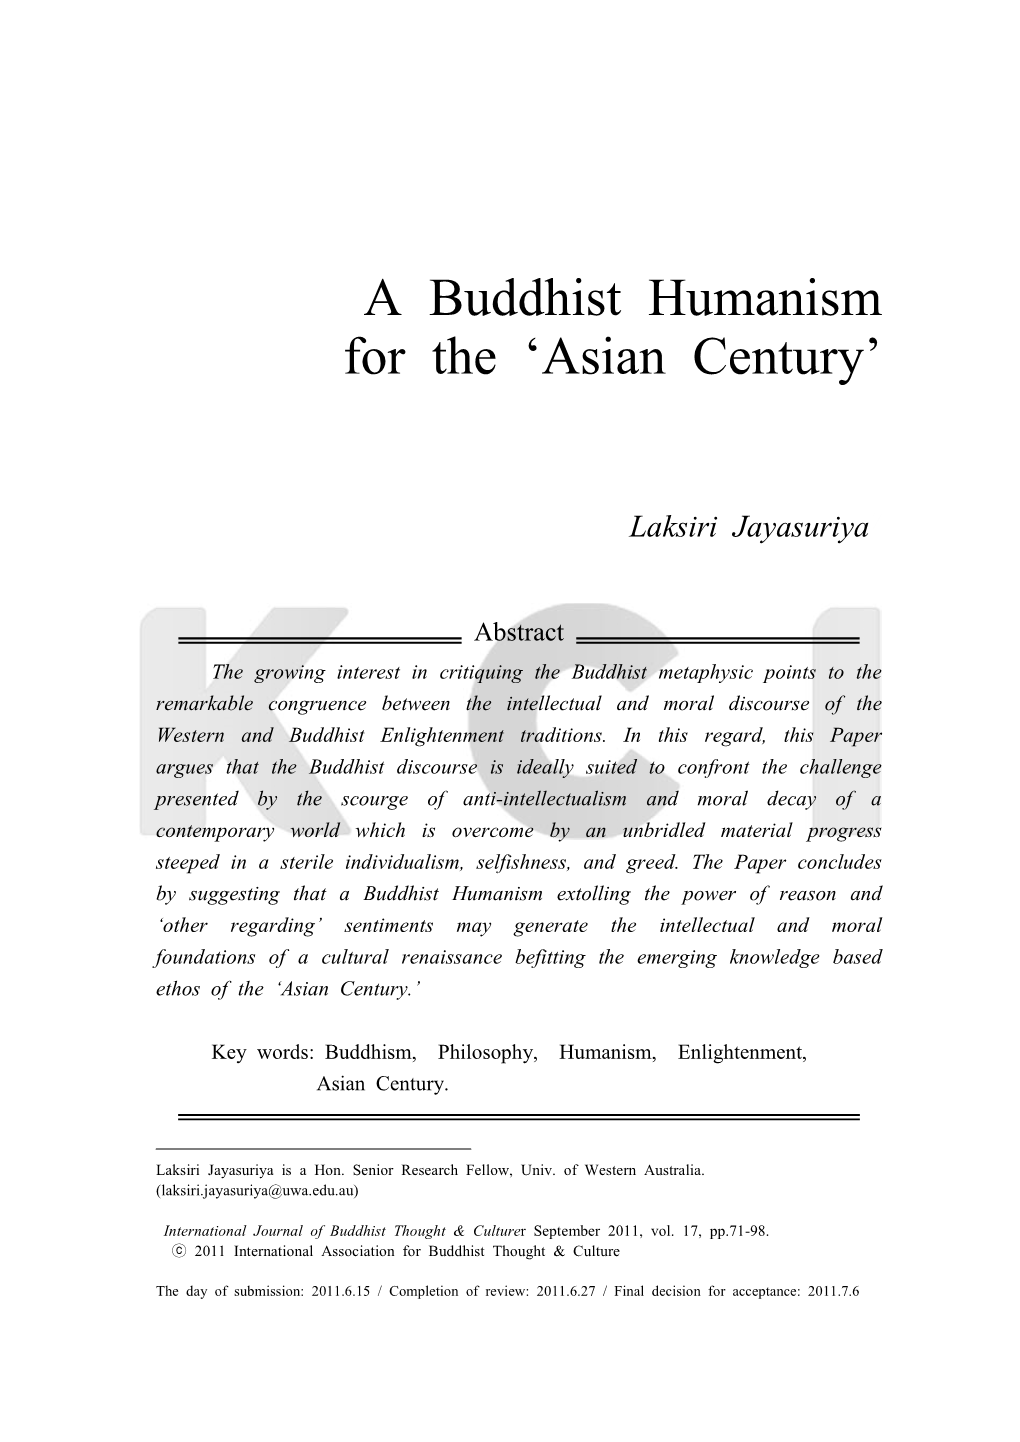 A Buddhist Humanism for the 'Asian Century'